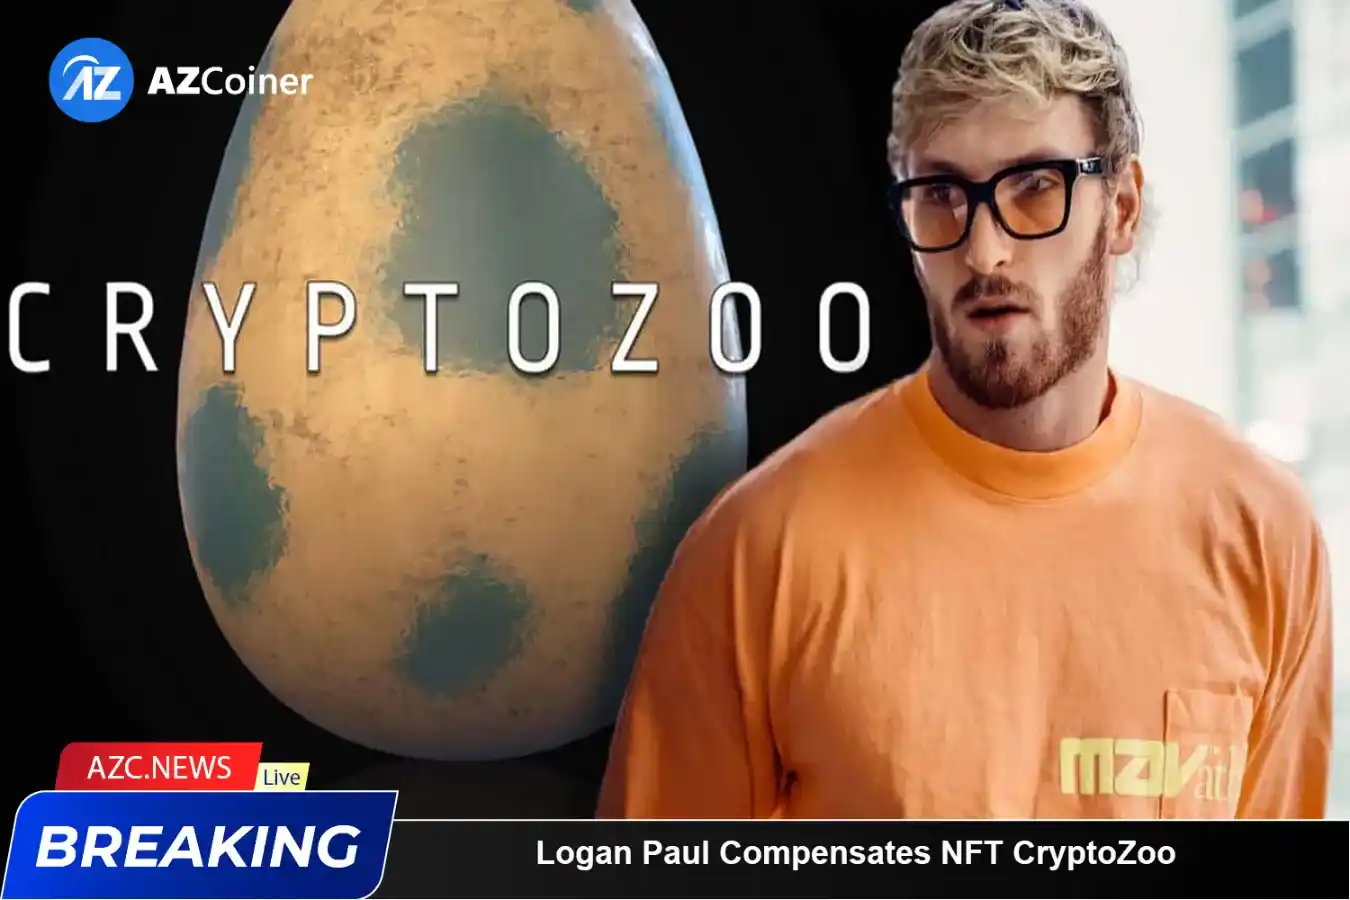 Logan Paul Will Compensate Victims Who Purchased Cryptozoo Nfts_65b9791c03f96.webp